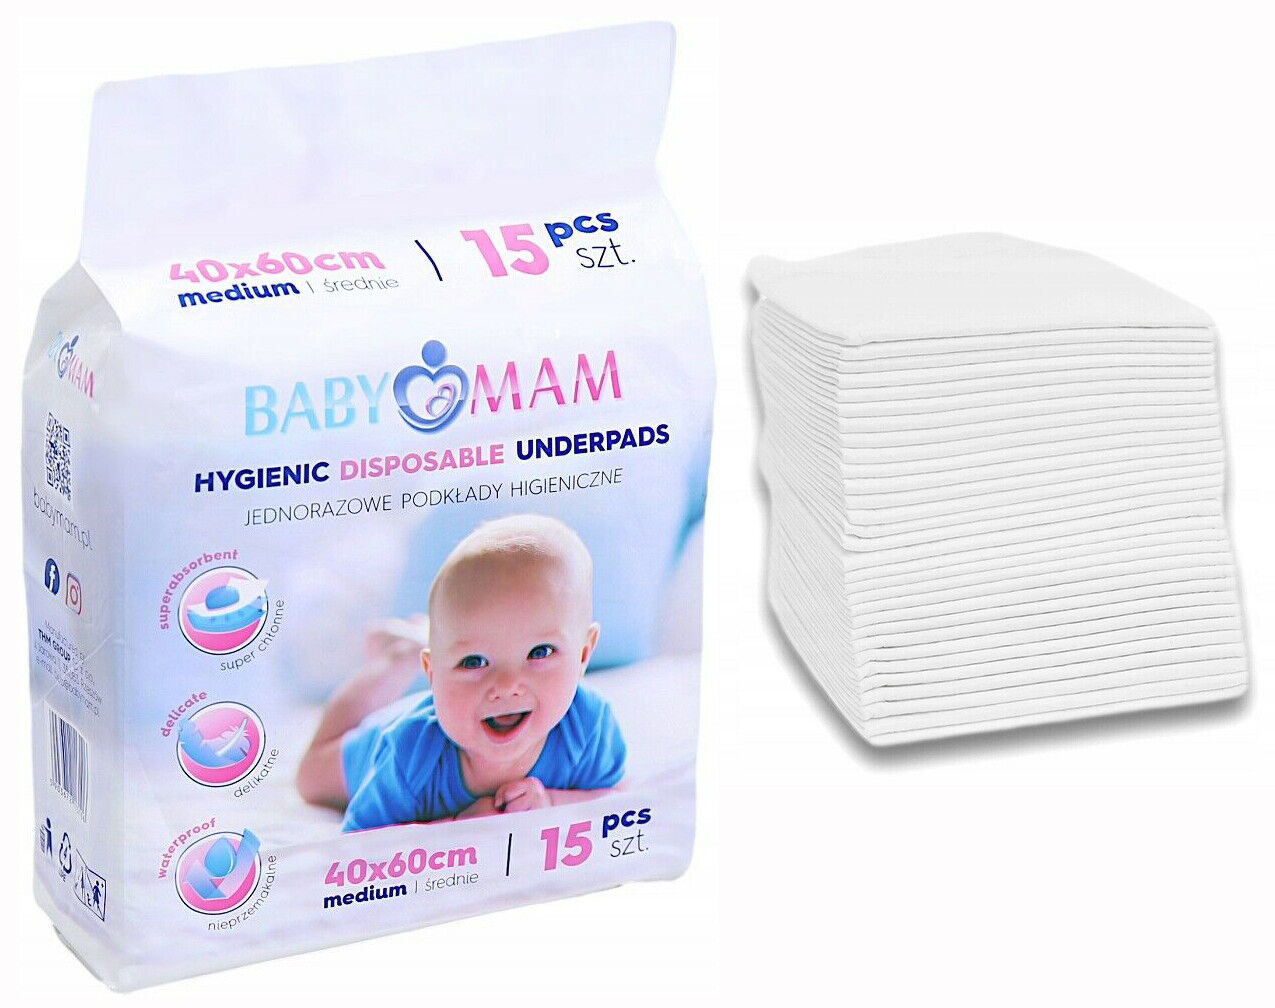 Baby Disposable Changing Mats Under pads Bed Cot Waterproof 60 x 40cm 15 sheets